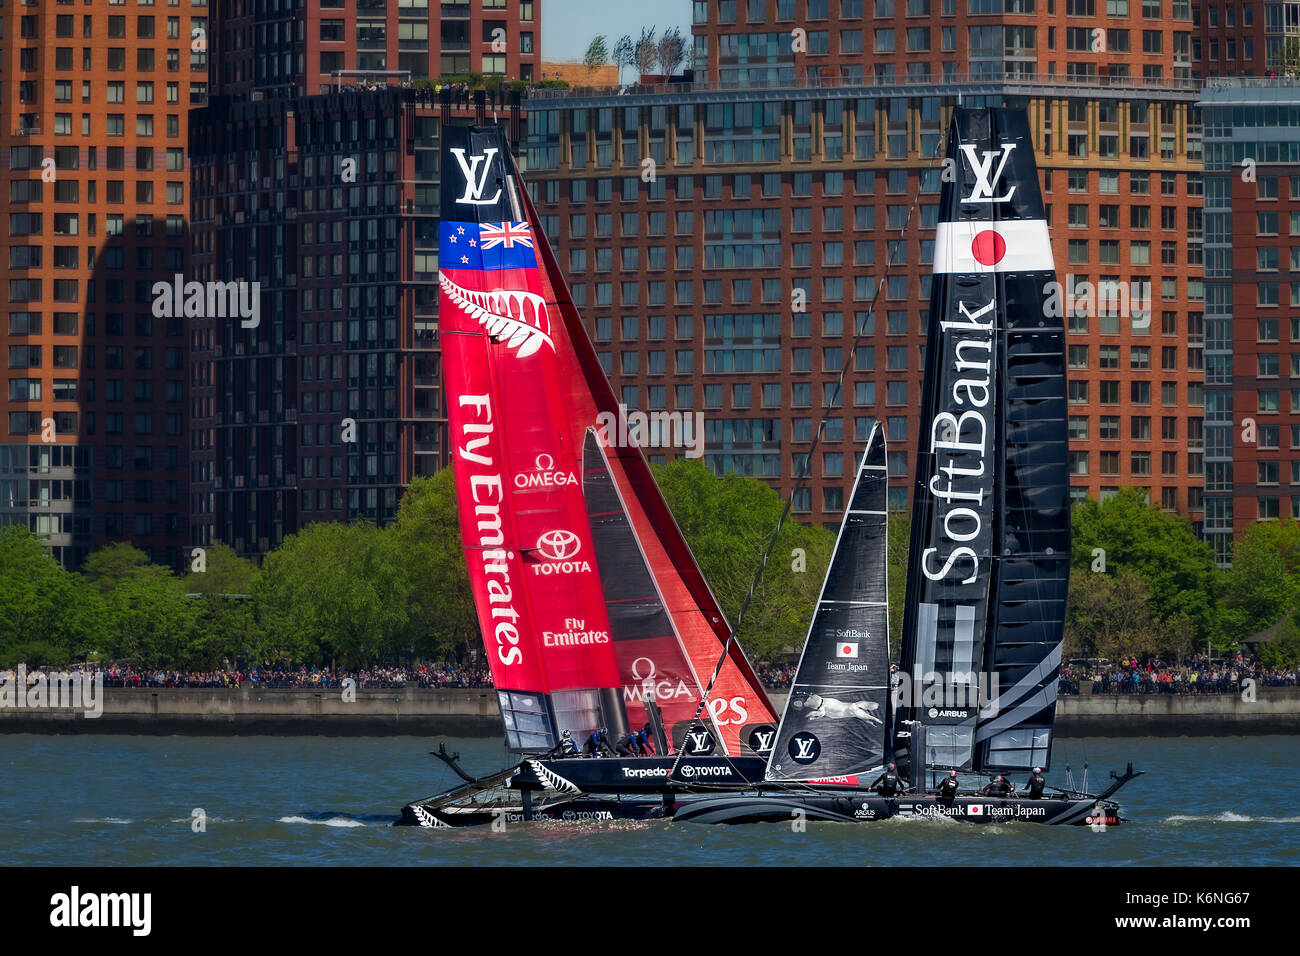 America's Cup World Series New York - SoftBank Team Japan and Emirates Team for New Zealand race on the Hudson River by the Lower Manhattan skyline during the Louis Vuitton America's Cup in New York City. Available in color and black and white. To view additional images please visit www.susancandelario.com Stock Photo